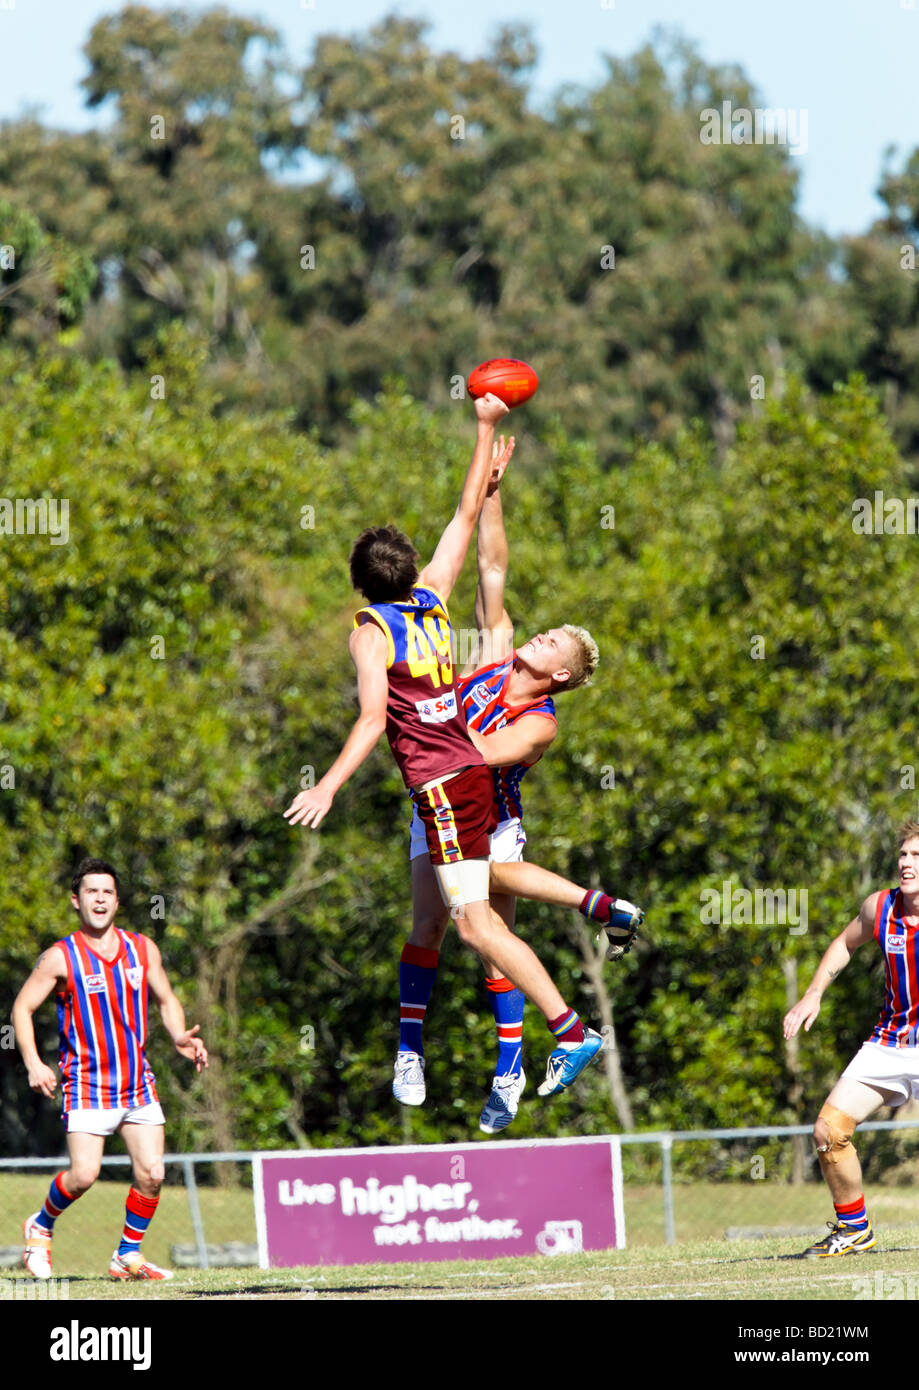 Australian Rules Football being played by two teams in a competition Stock Photo